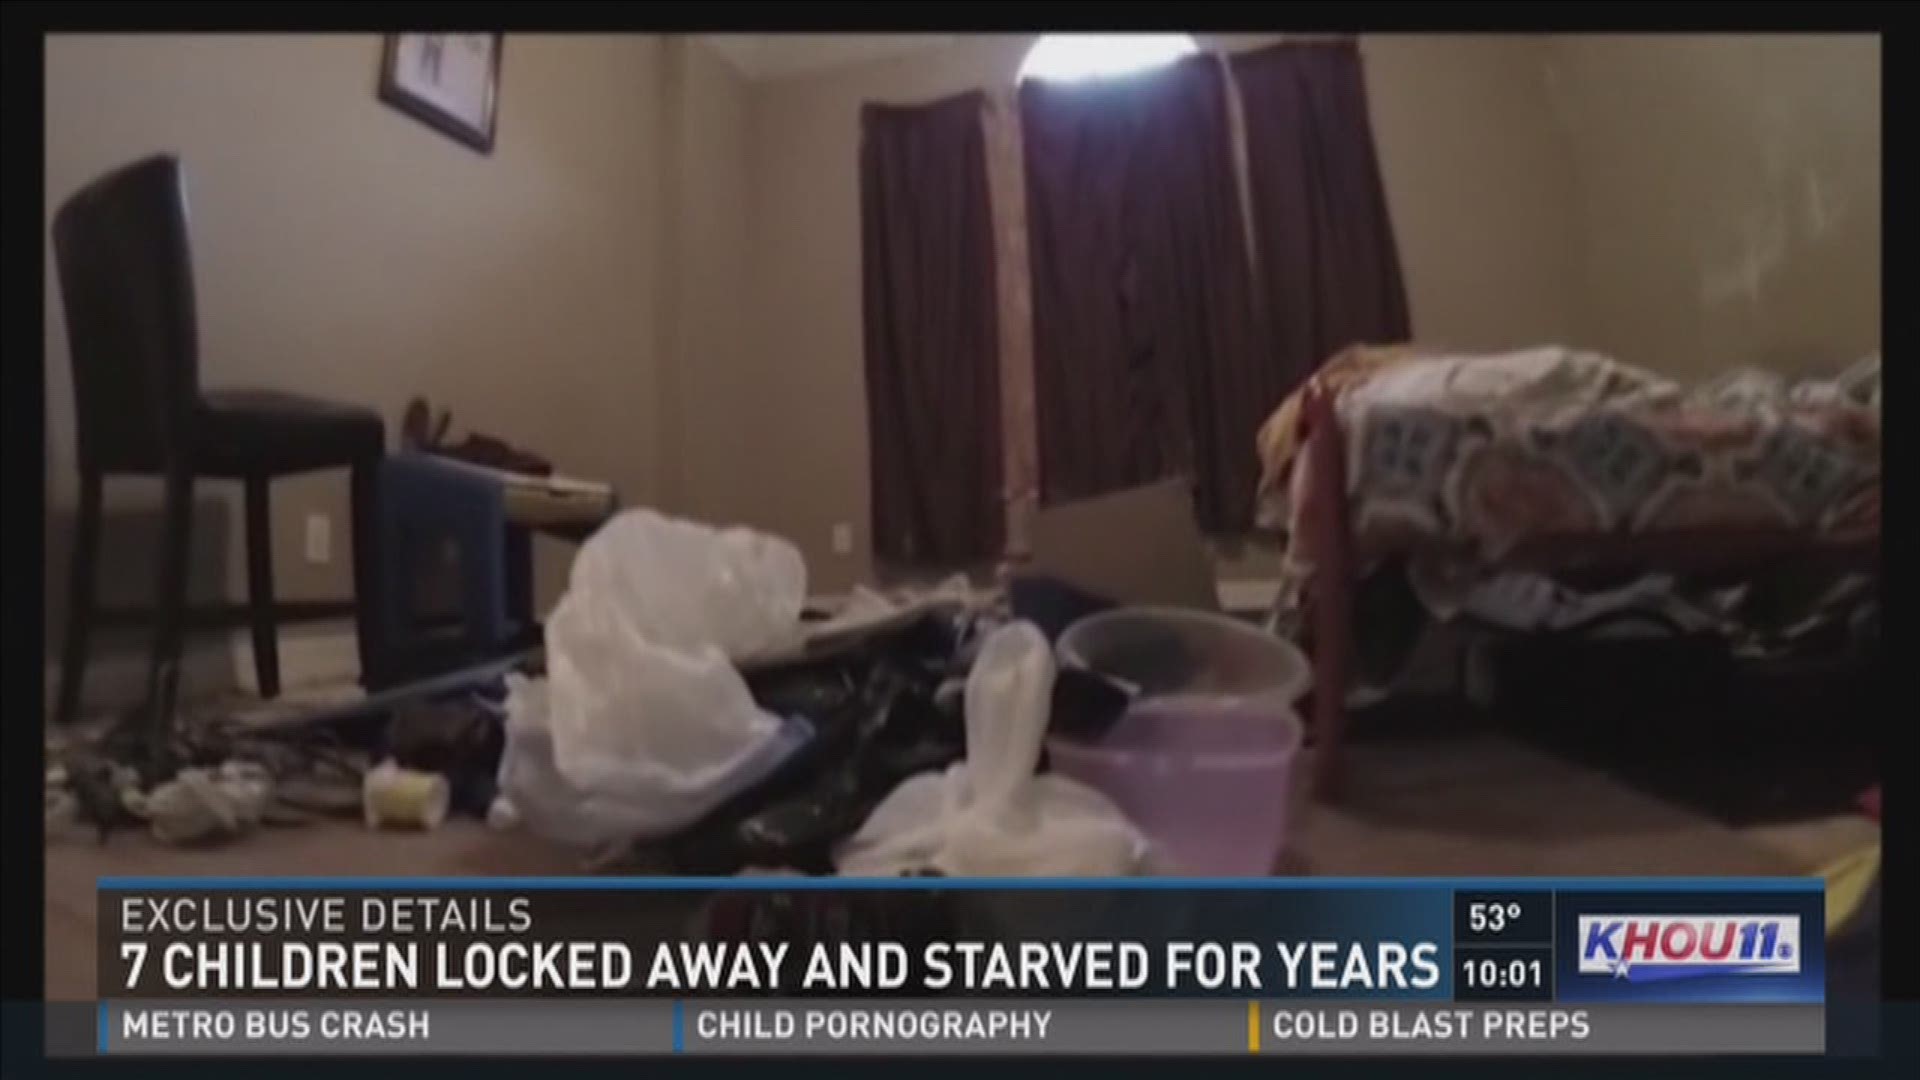 Investigators say children with special needs were starved and locked away in a room for years.